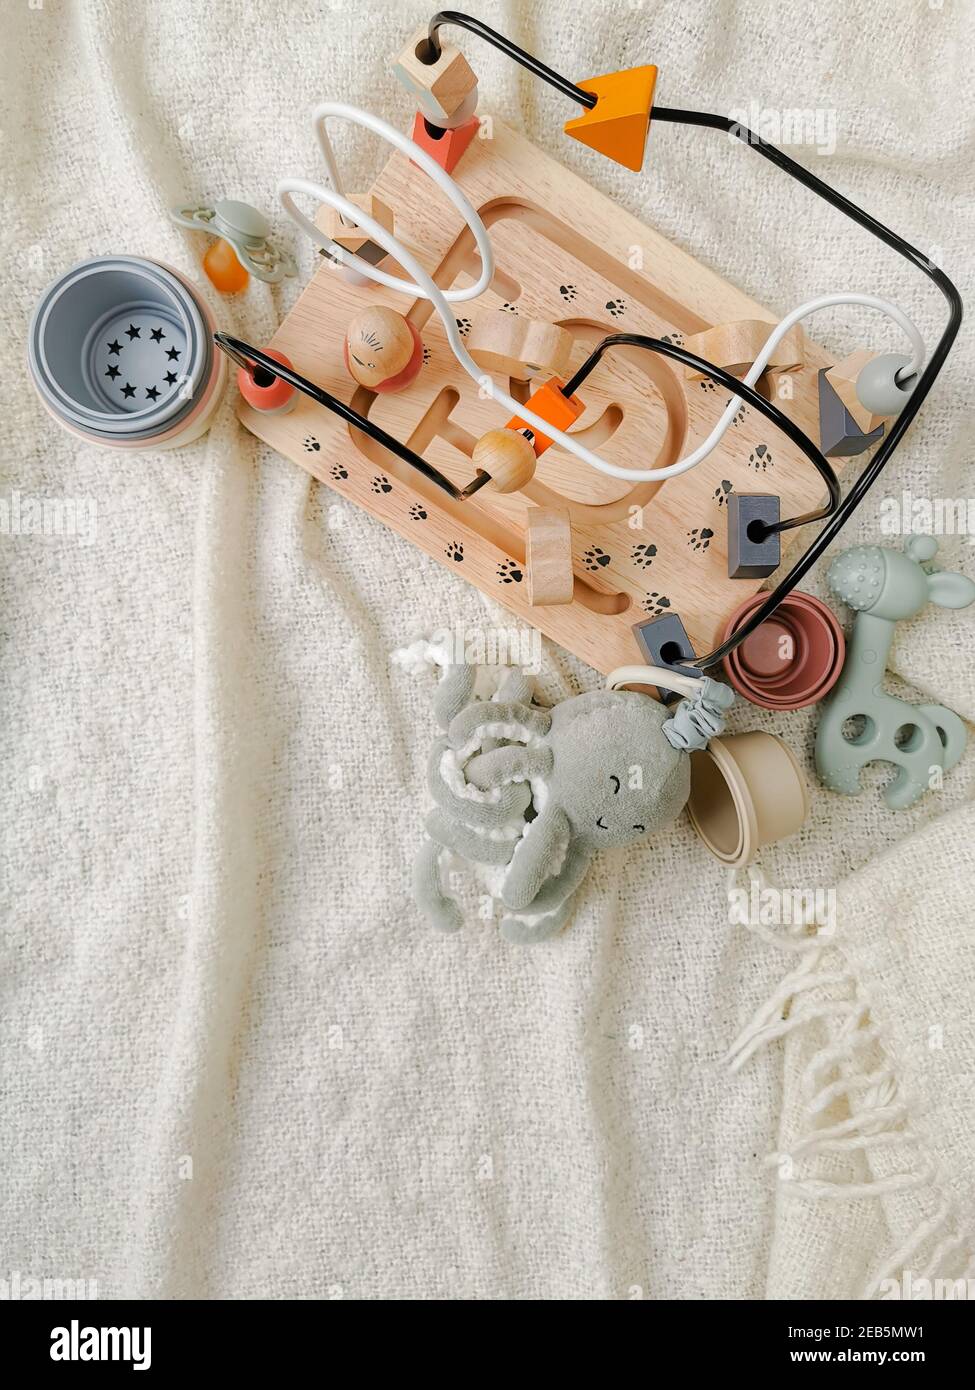 Gender neutral toys for babies in muted soft colors. Wooden blocks en bead frame, teething toy. Flat lay. Gender neutral parenting. Stock Photo